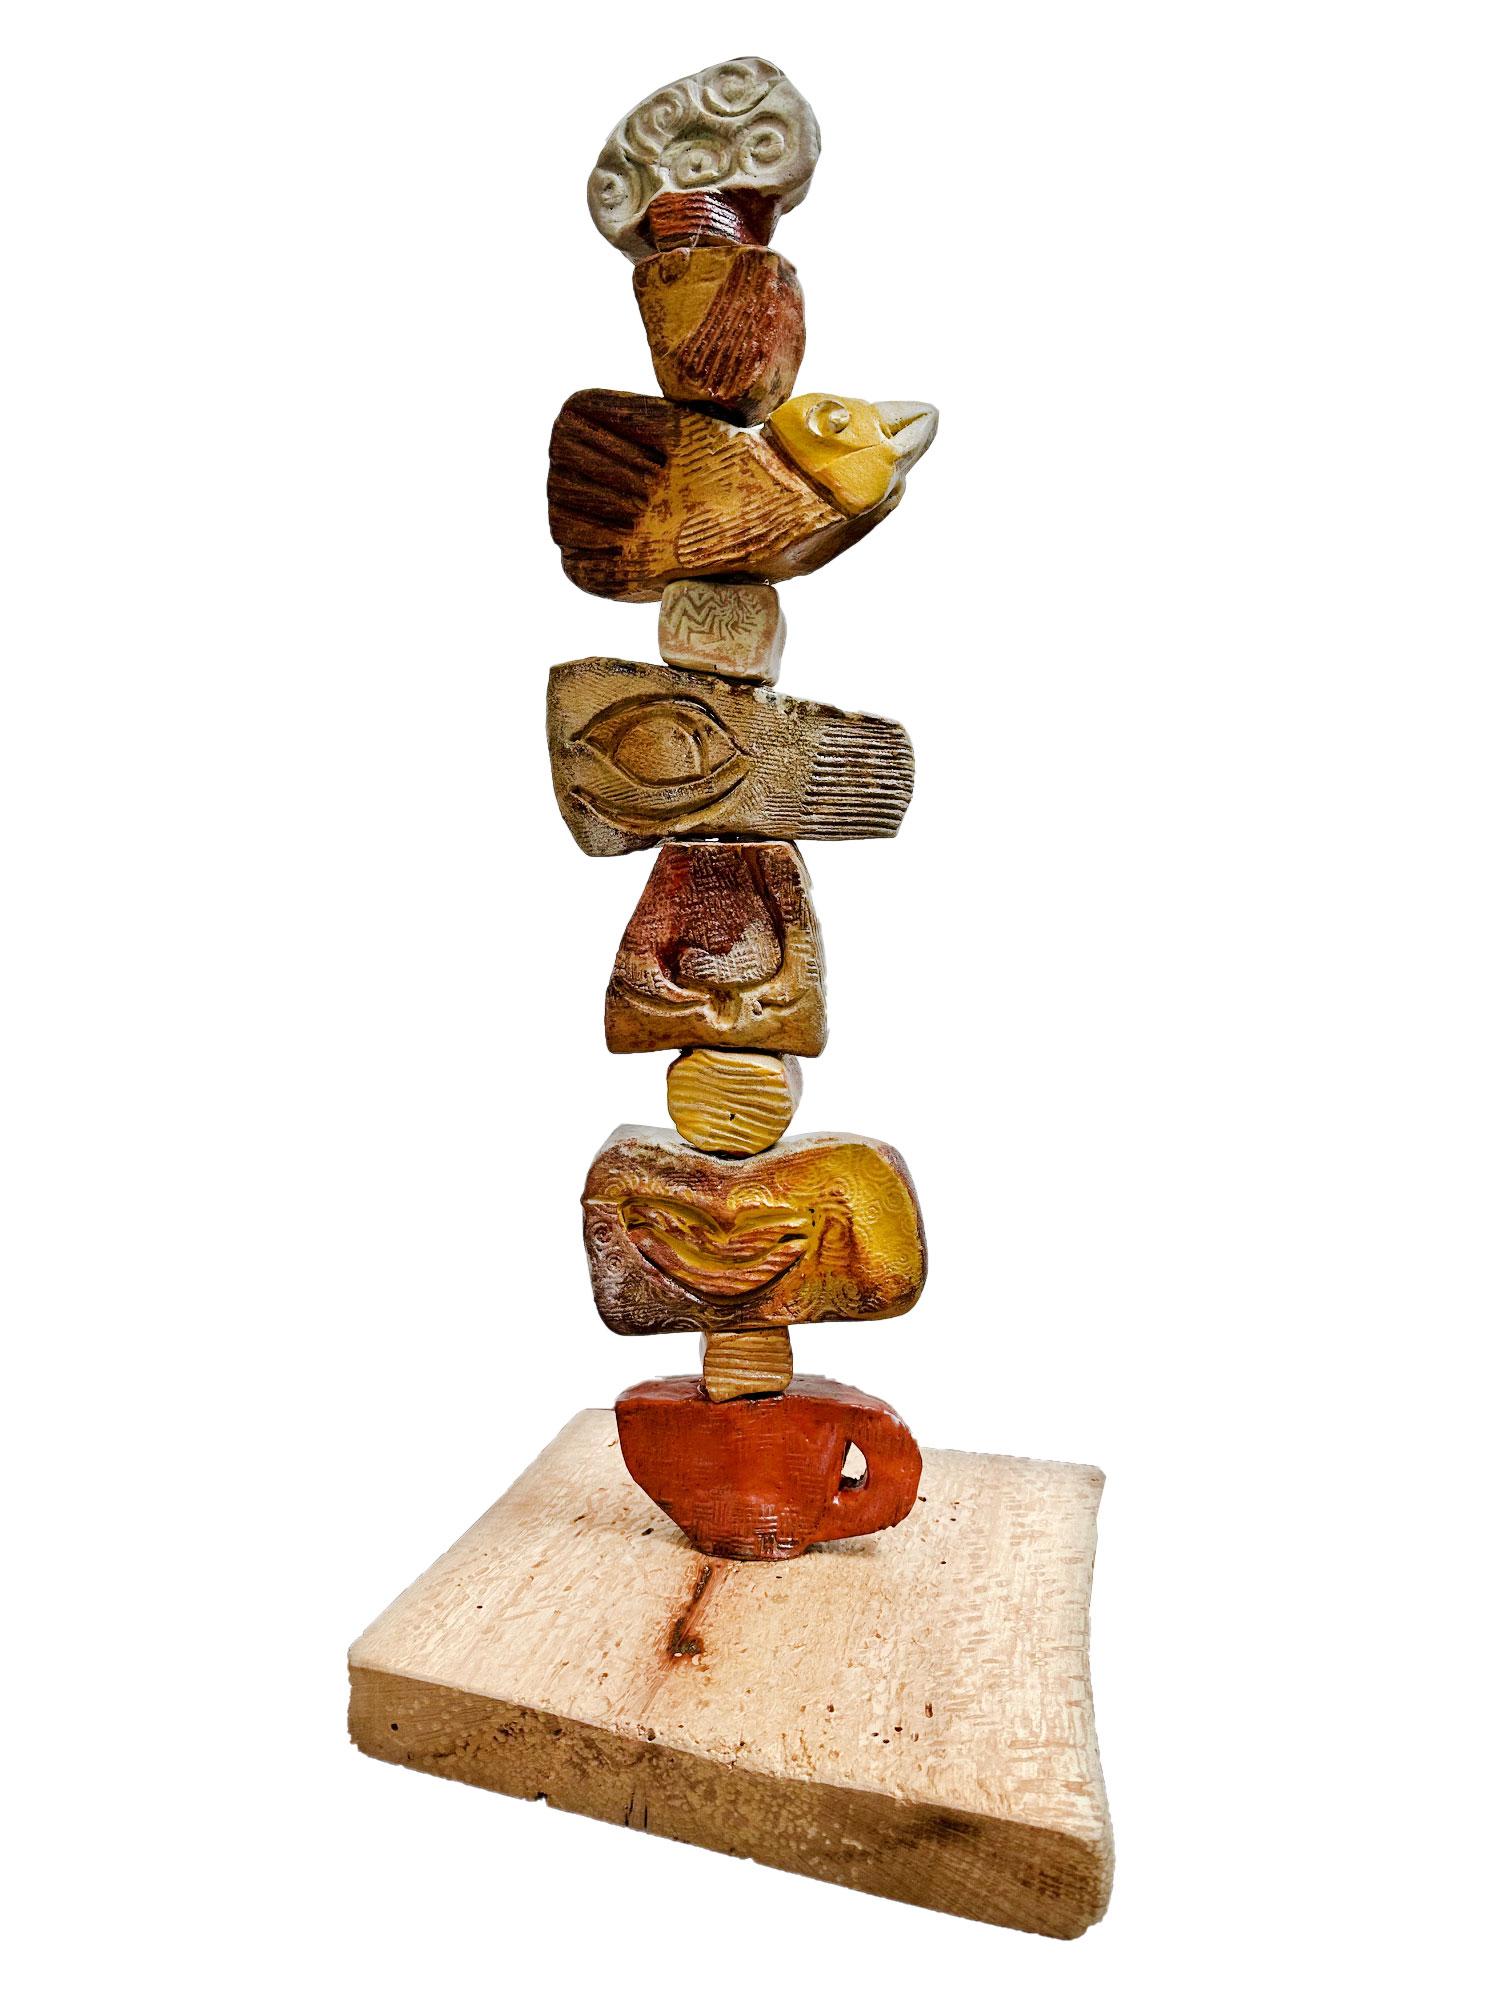 This masterpiece is exhibited in the Zimmerman Gallery, Carmel CA.

Dive into the whimsical realm of mystique with this utterly enchanting totem. Crafted with meticulous detail, this extraordinary piece effortlessly dances between the realms of